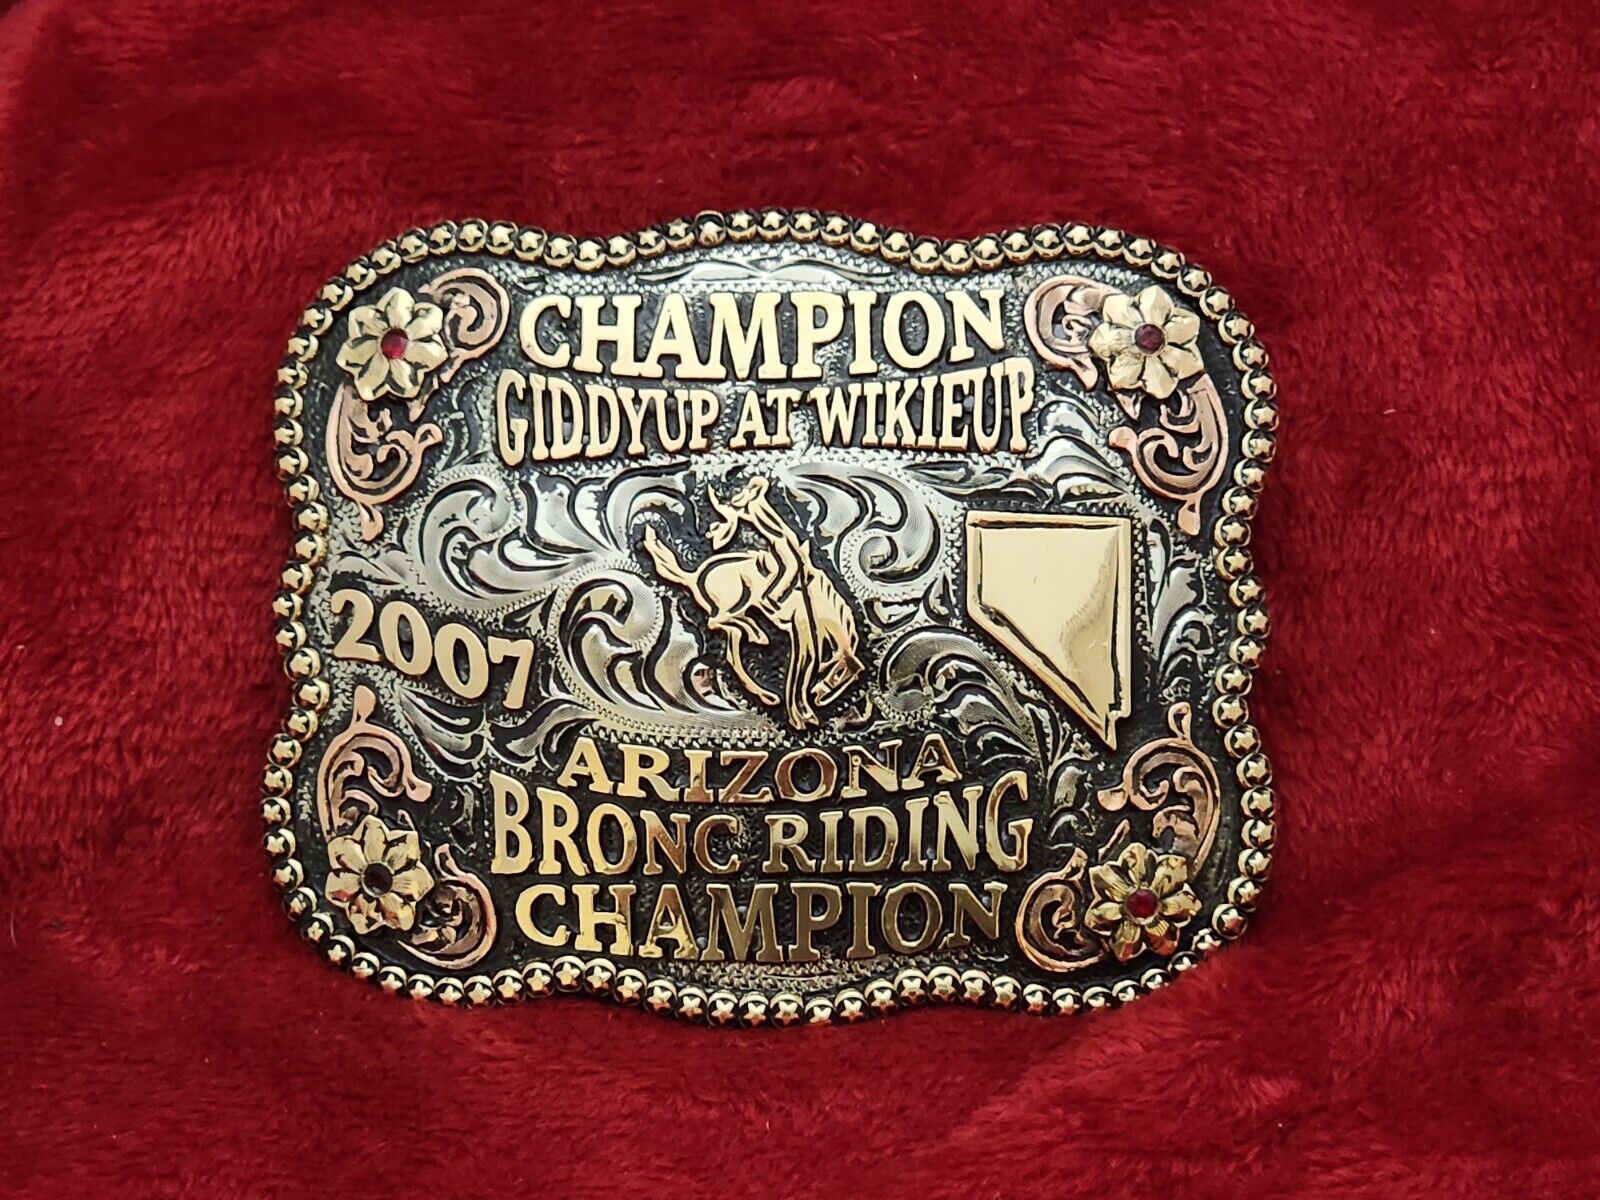 CHAMPION TROPHY BUCKLE PRO RODEO☆BRONC RIDER☆WICKIEUP☆2007☆RARE☆138